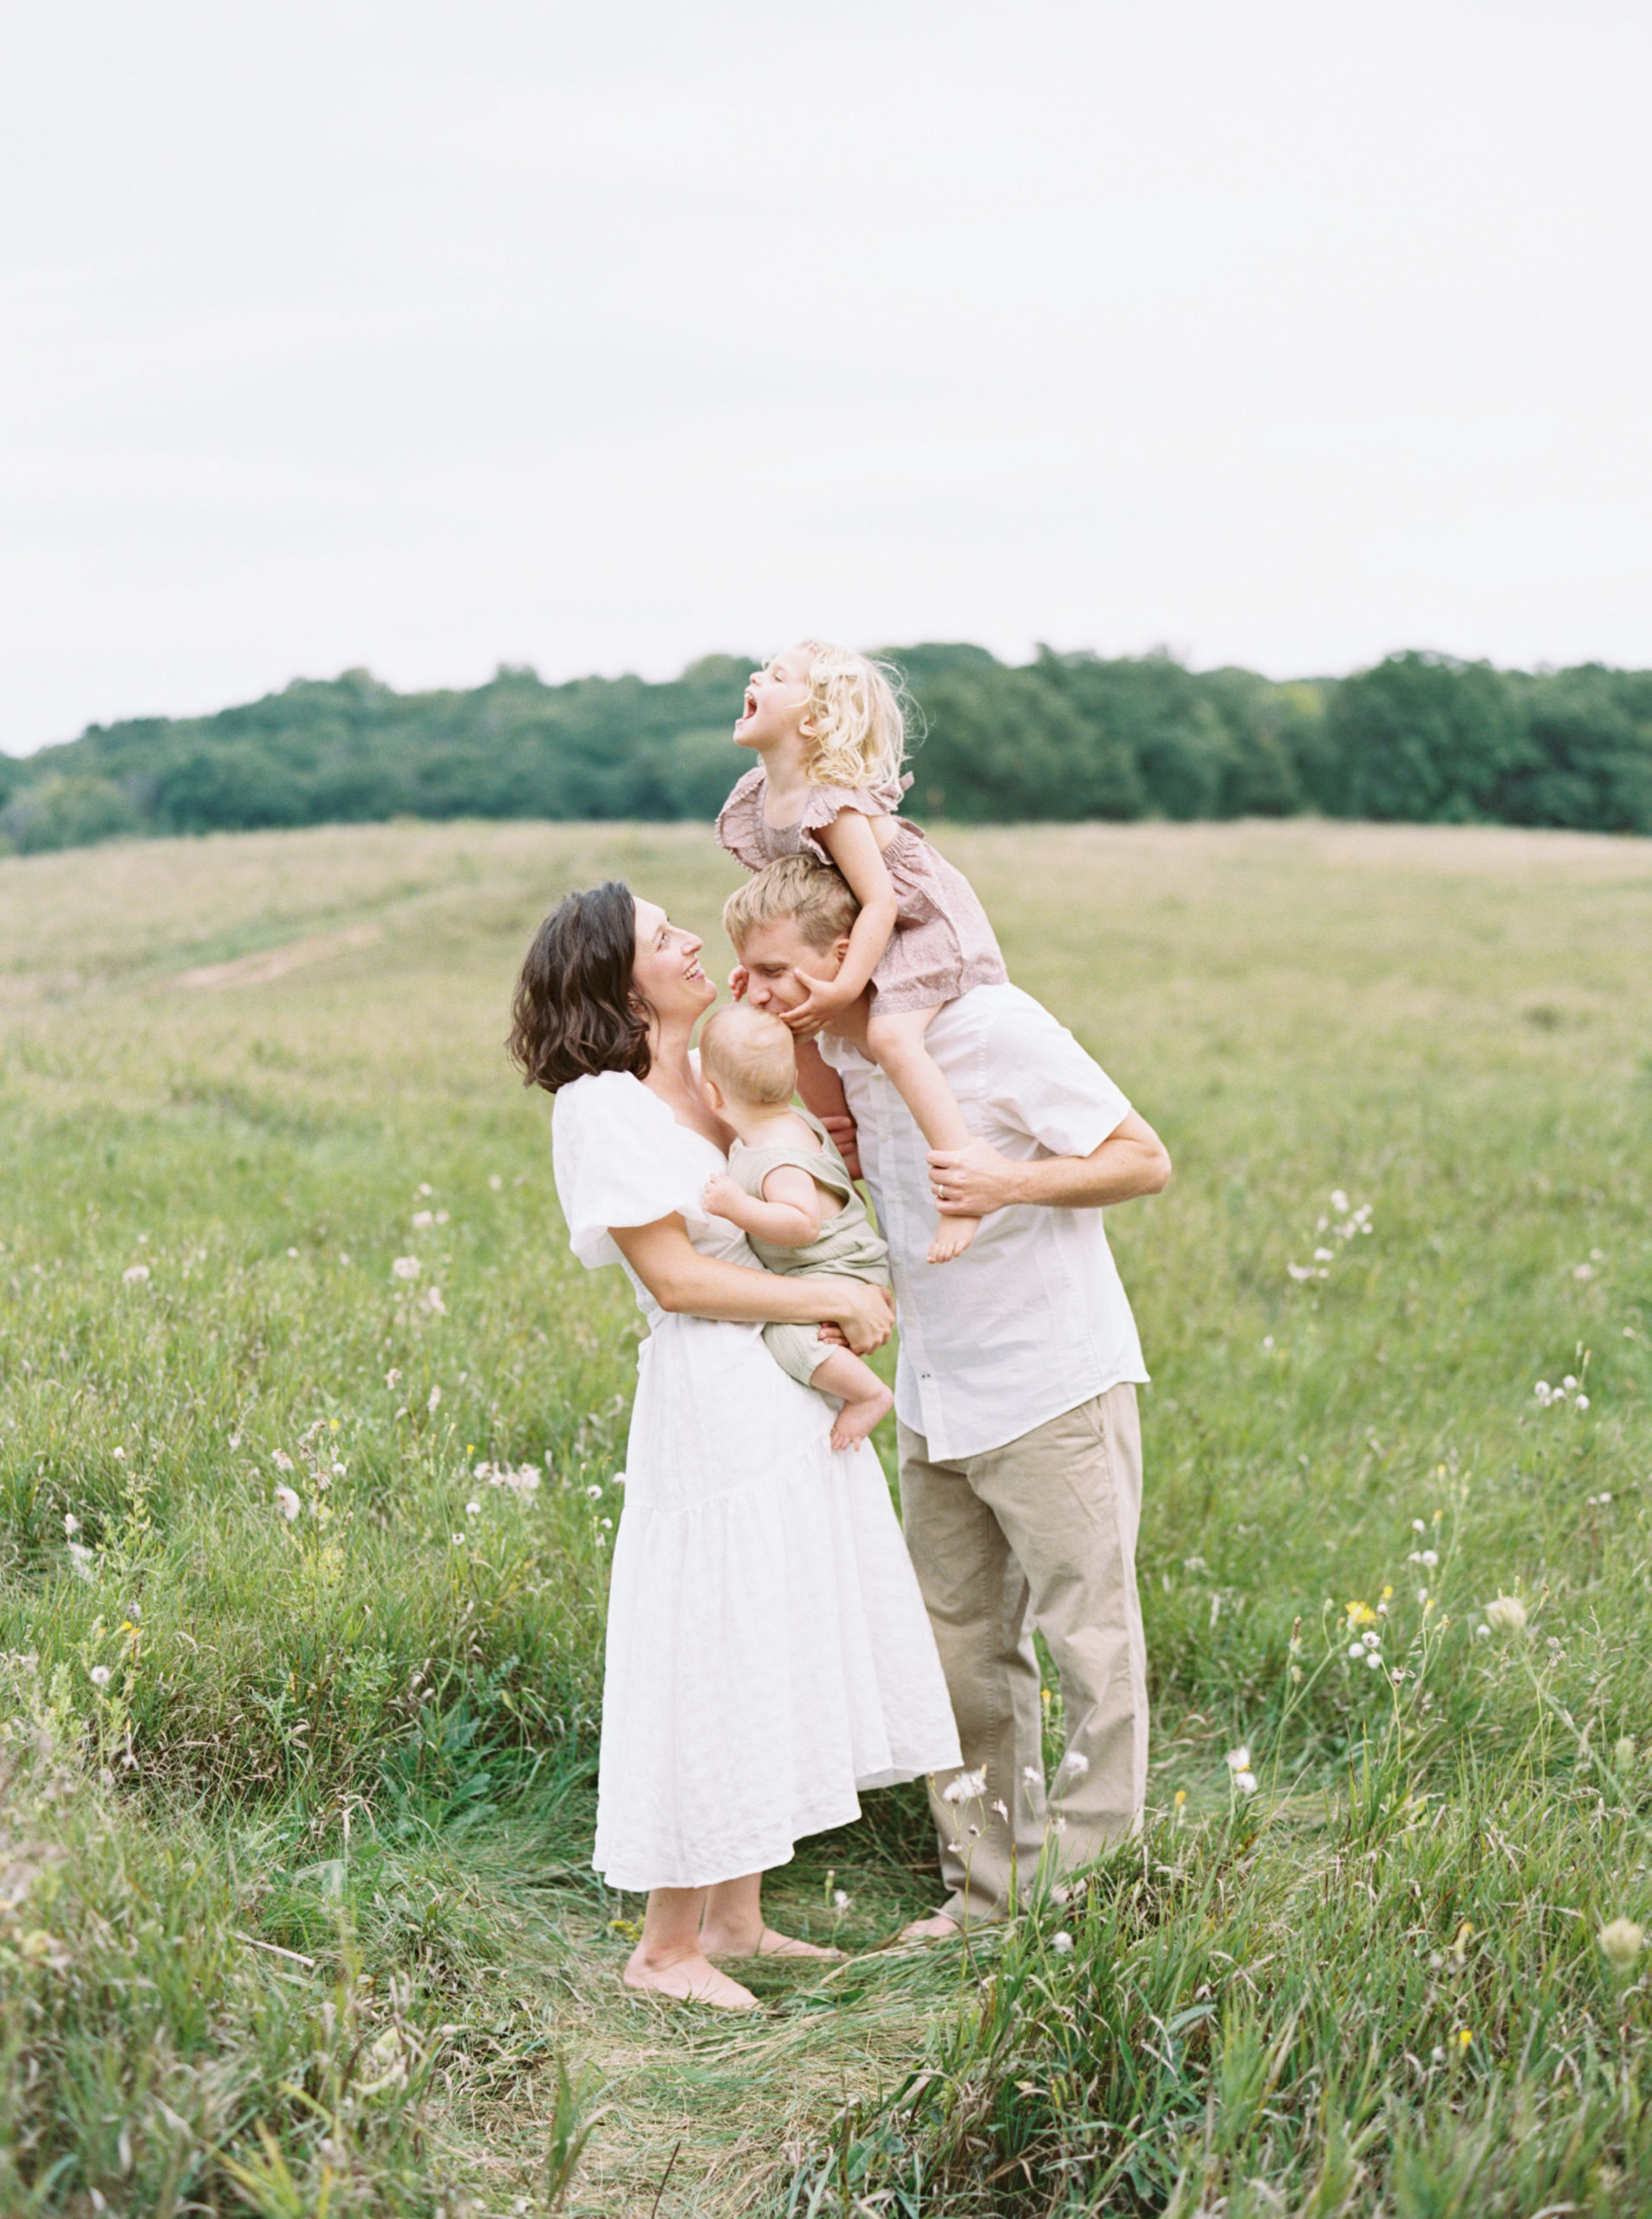 family portrait in a grassy green field setting in Milwaukee in the summer